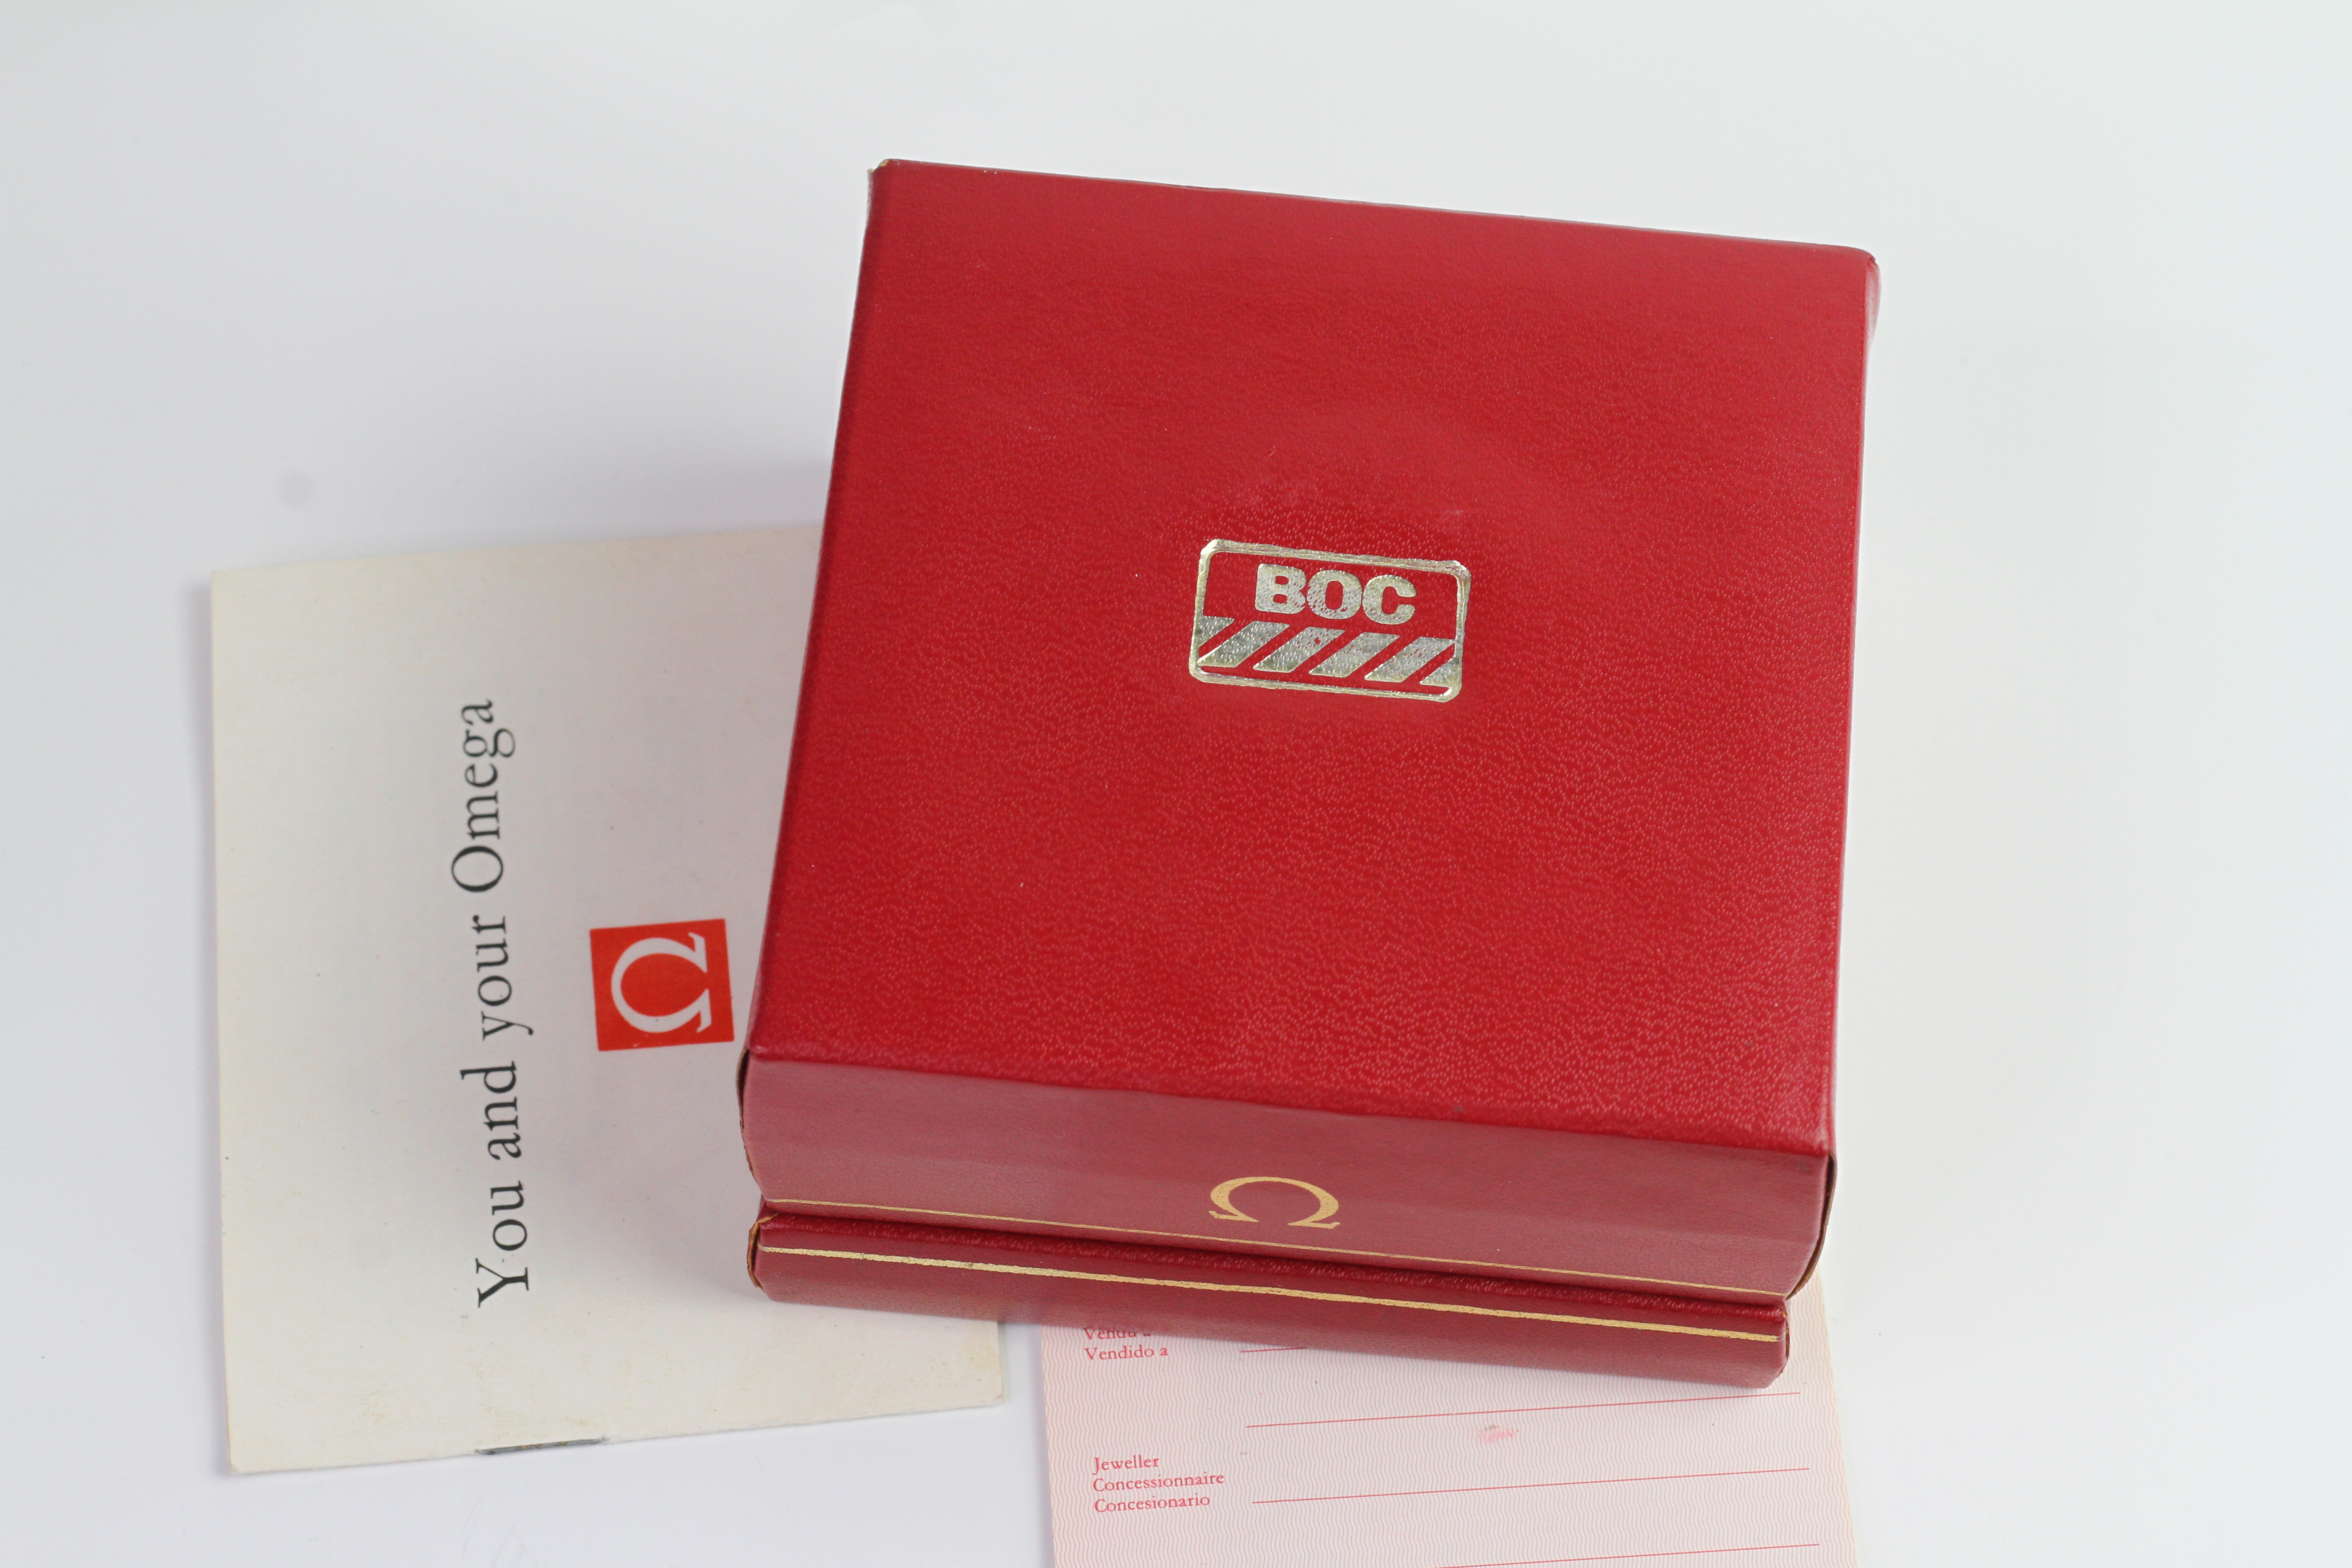 VINTAGE OMEGA SPEEDMASTER MKIV REFERENCE 176.009 WITH BOX AND PAPERS, circular black dial, - Image 4 of 10